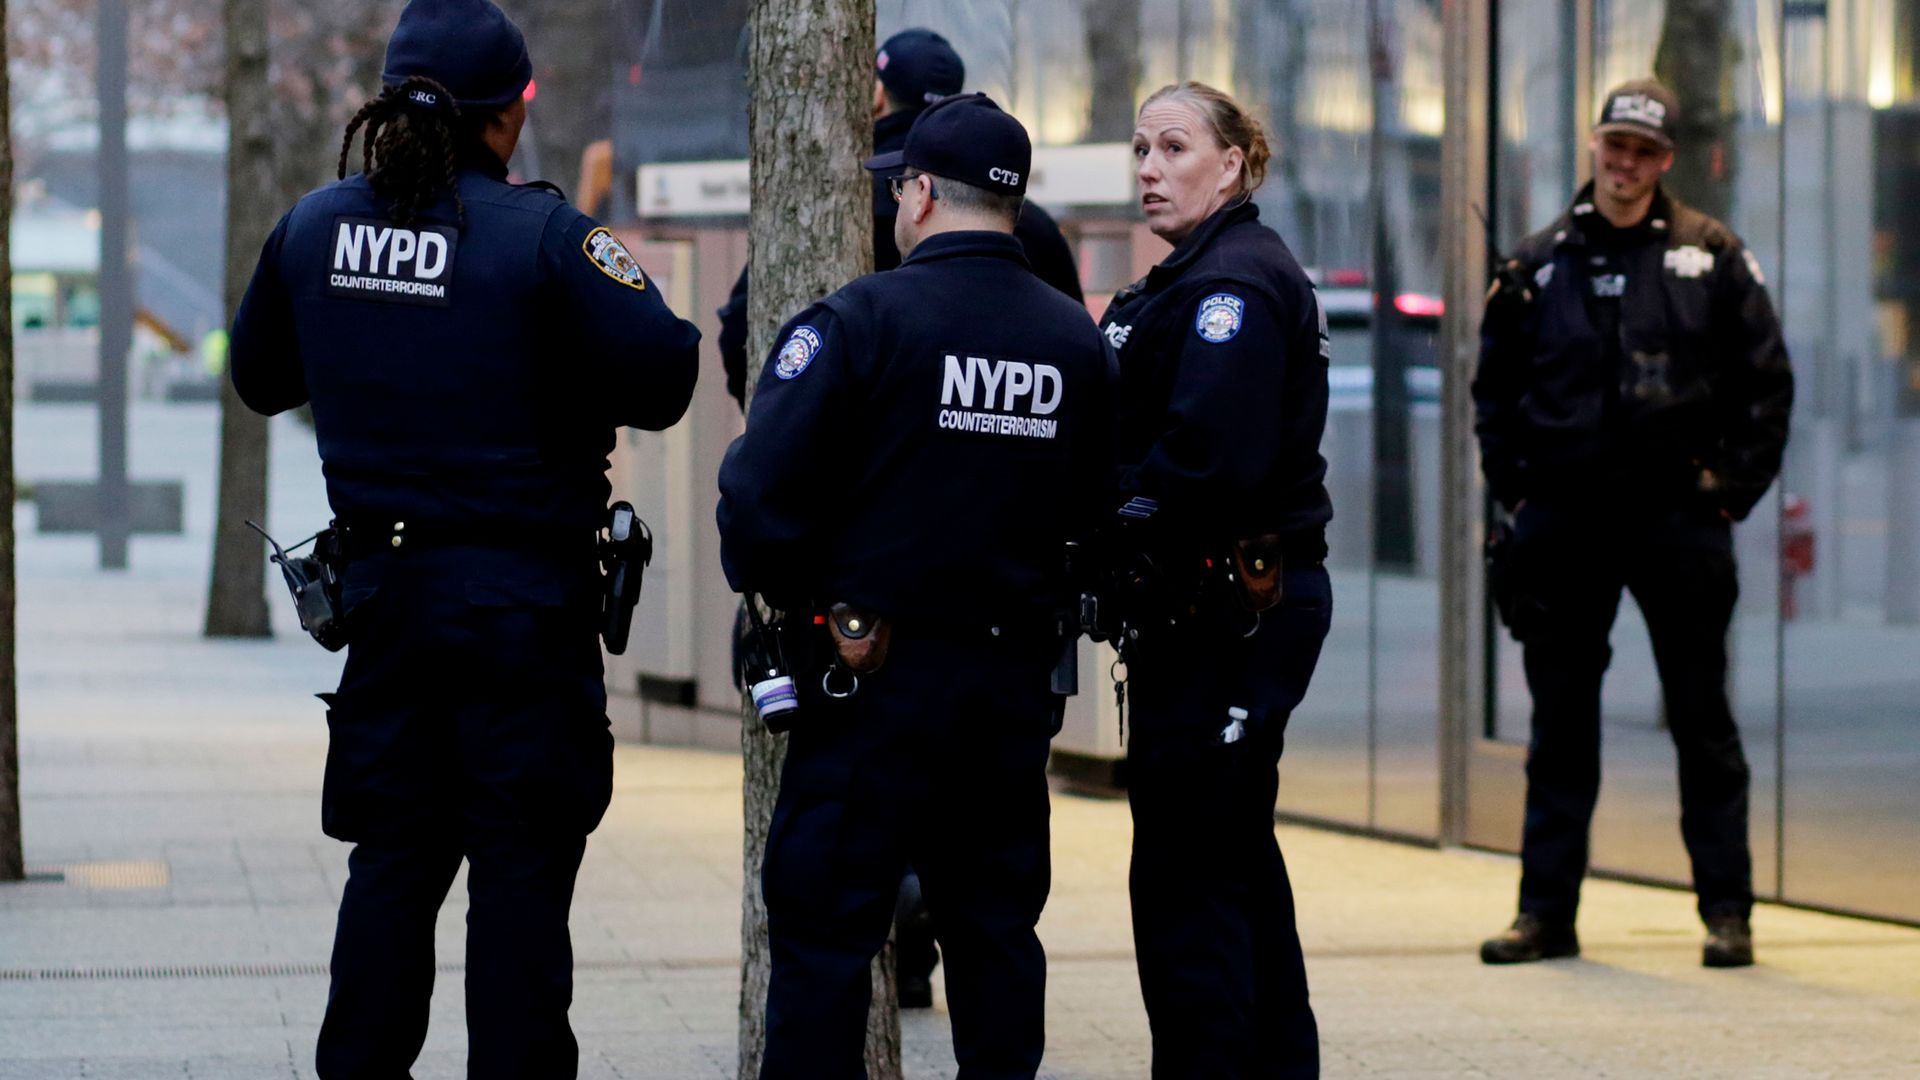 A mob of unruly illegal migrants at a New York City migrant shelter attacked NYPD officers during an arrest attempt.